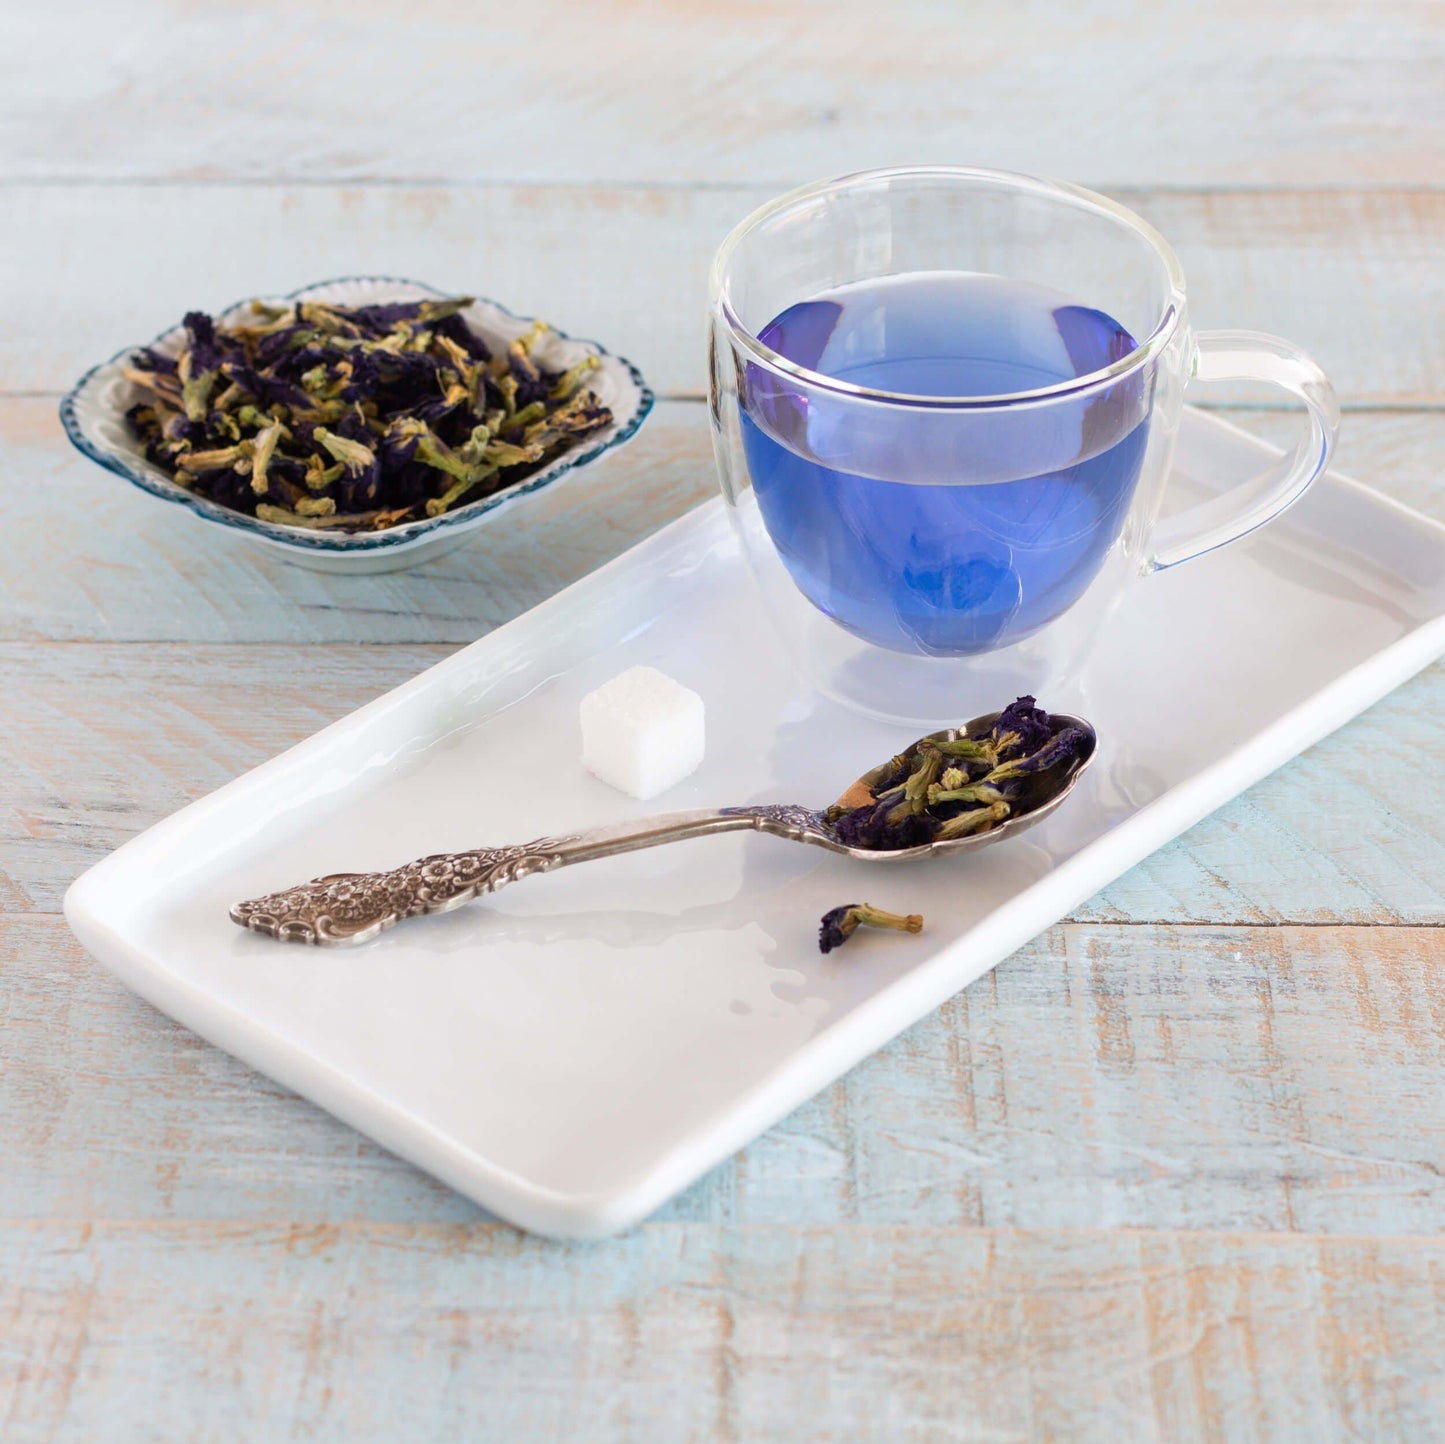 Bowl of loose-leaf Butterfly Pea Flower Herbal Tea with glass mug on tray